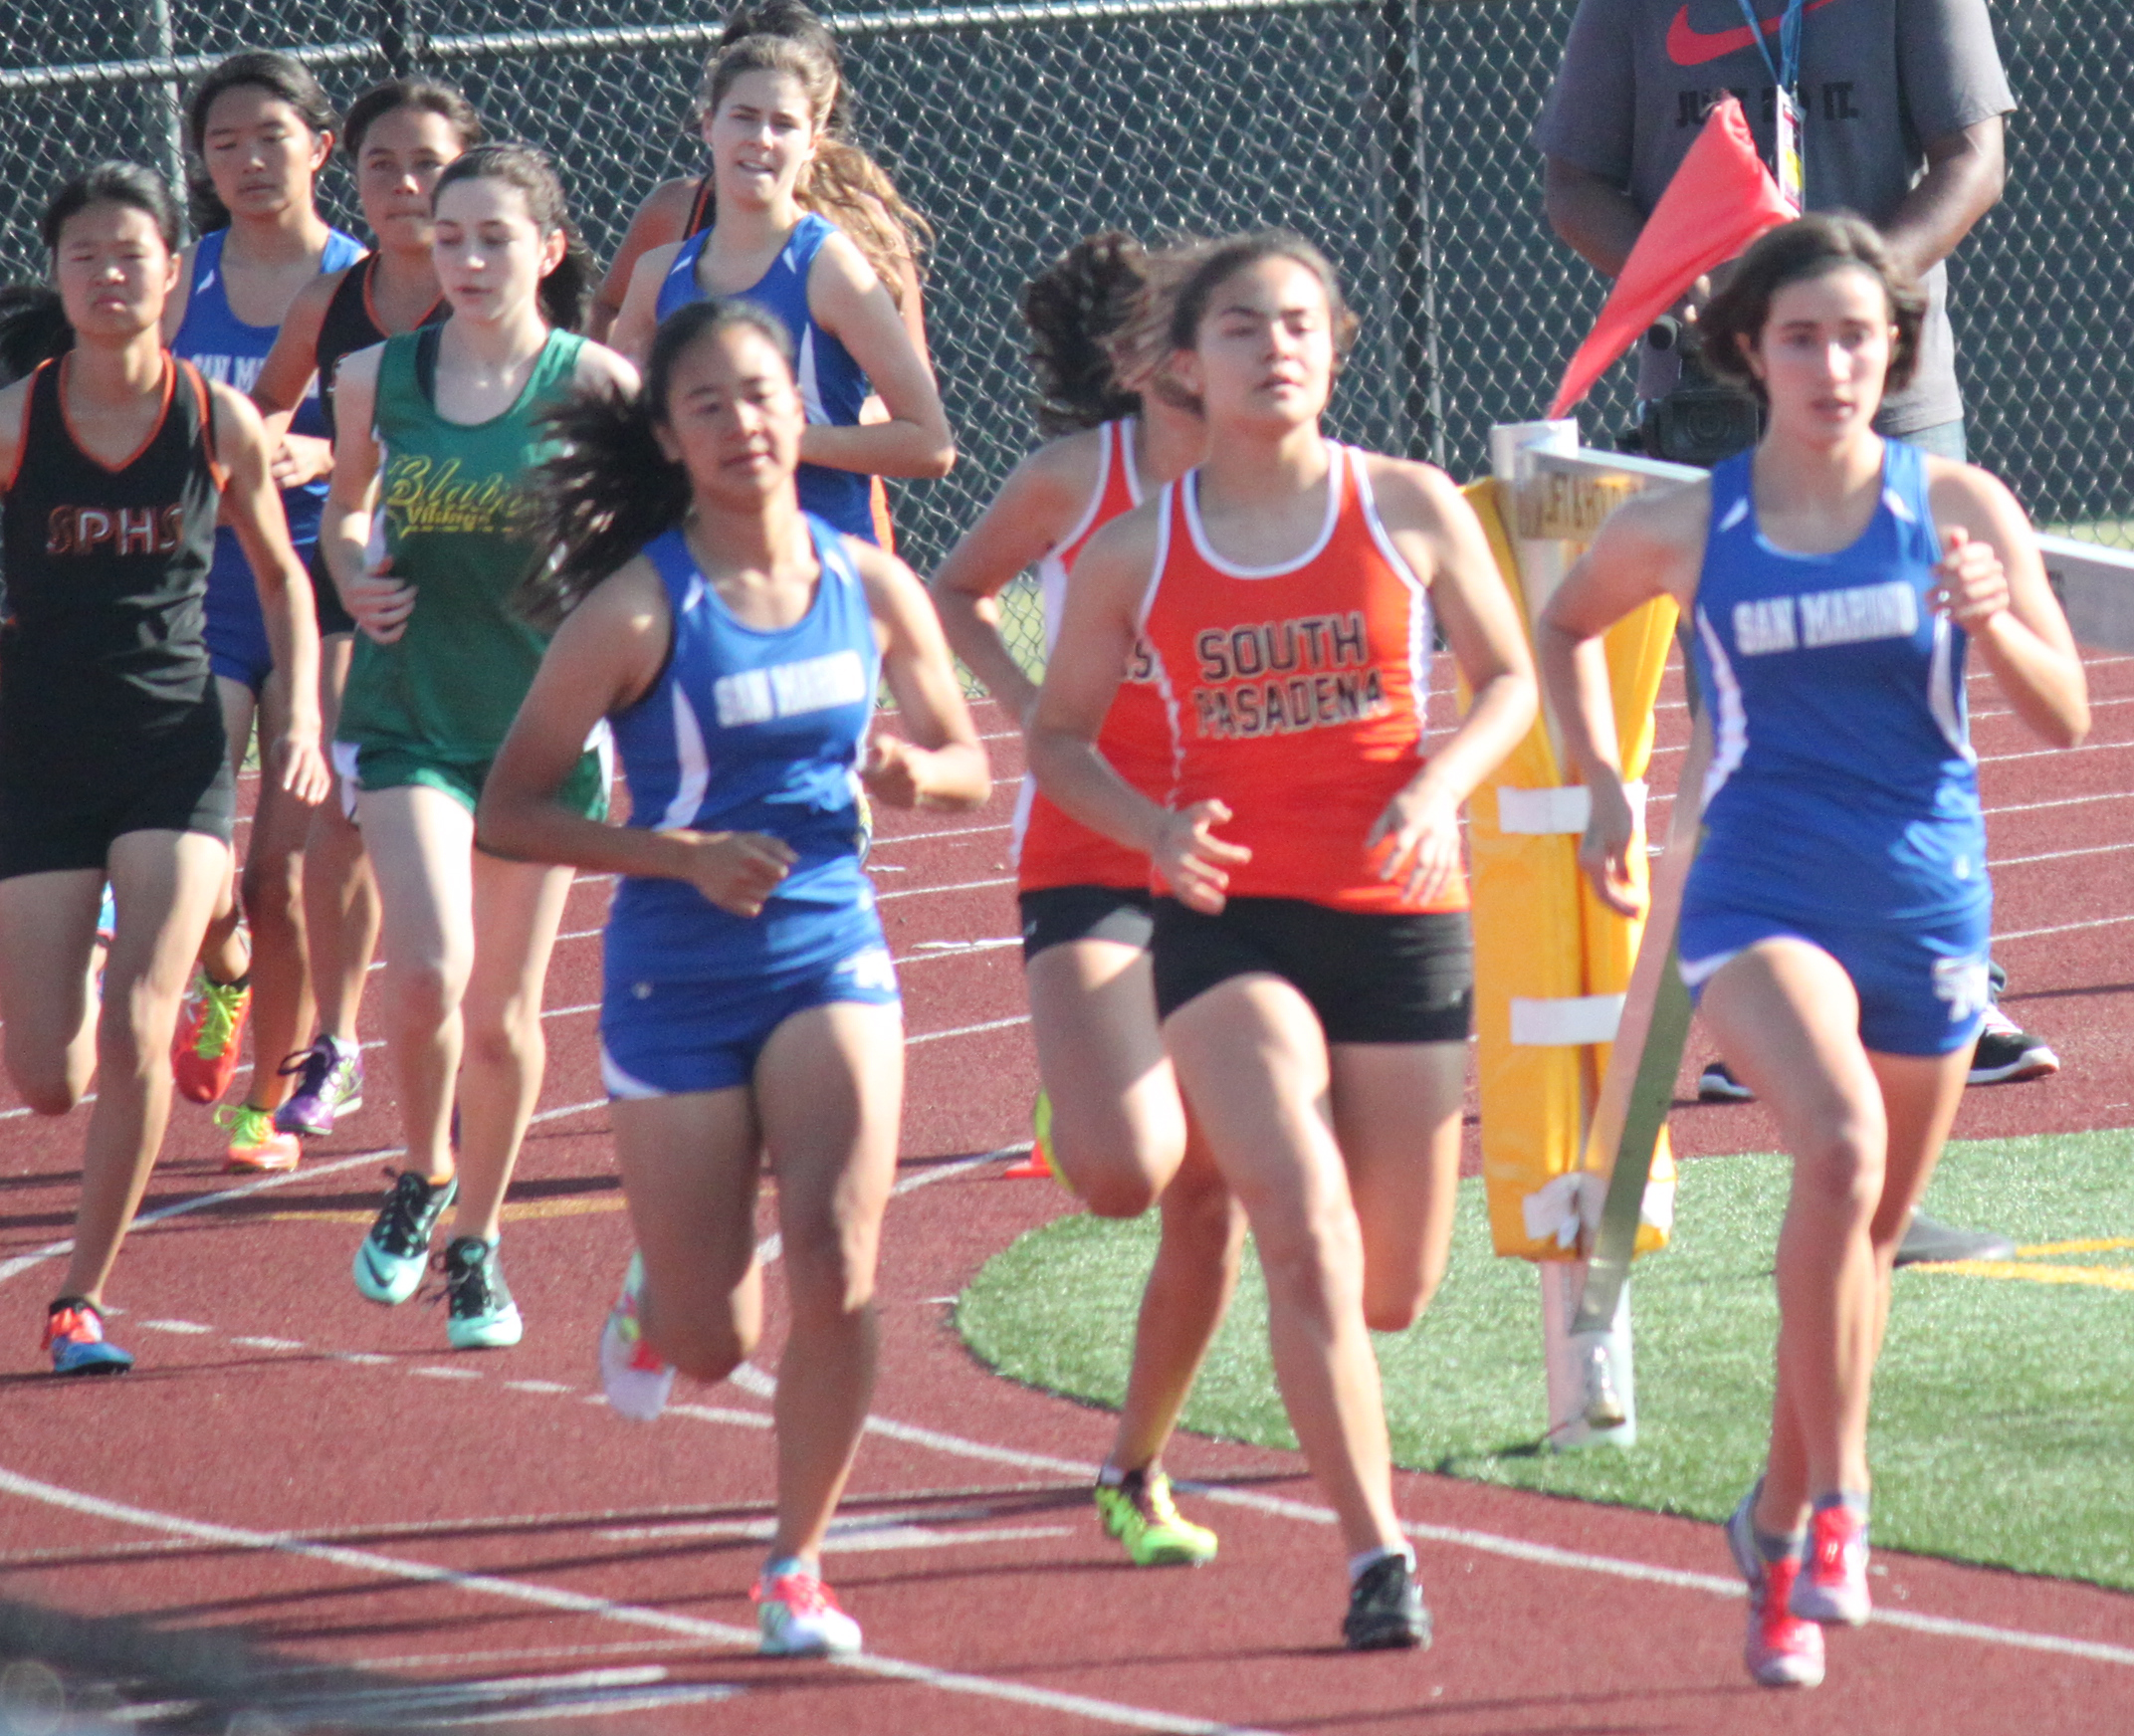 2015-04-14 - Olivia leads the 800 pack